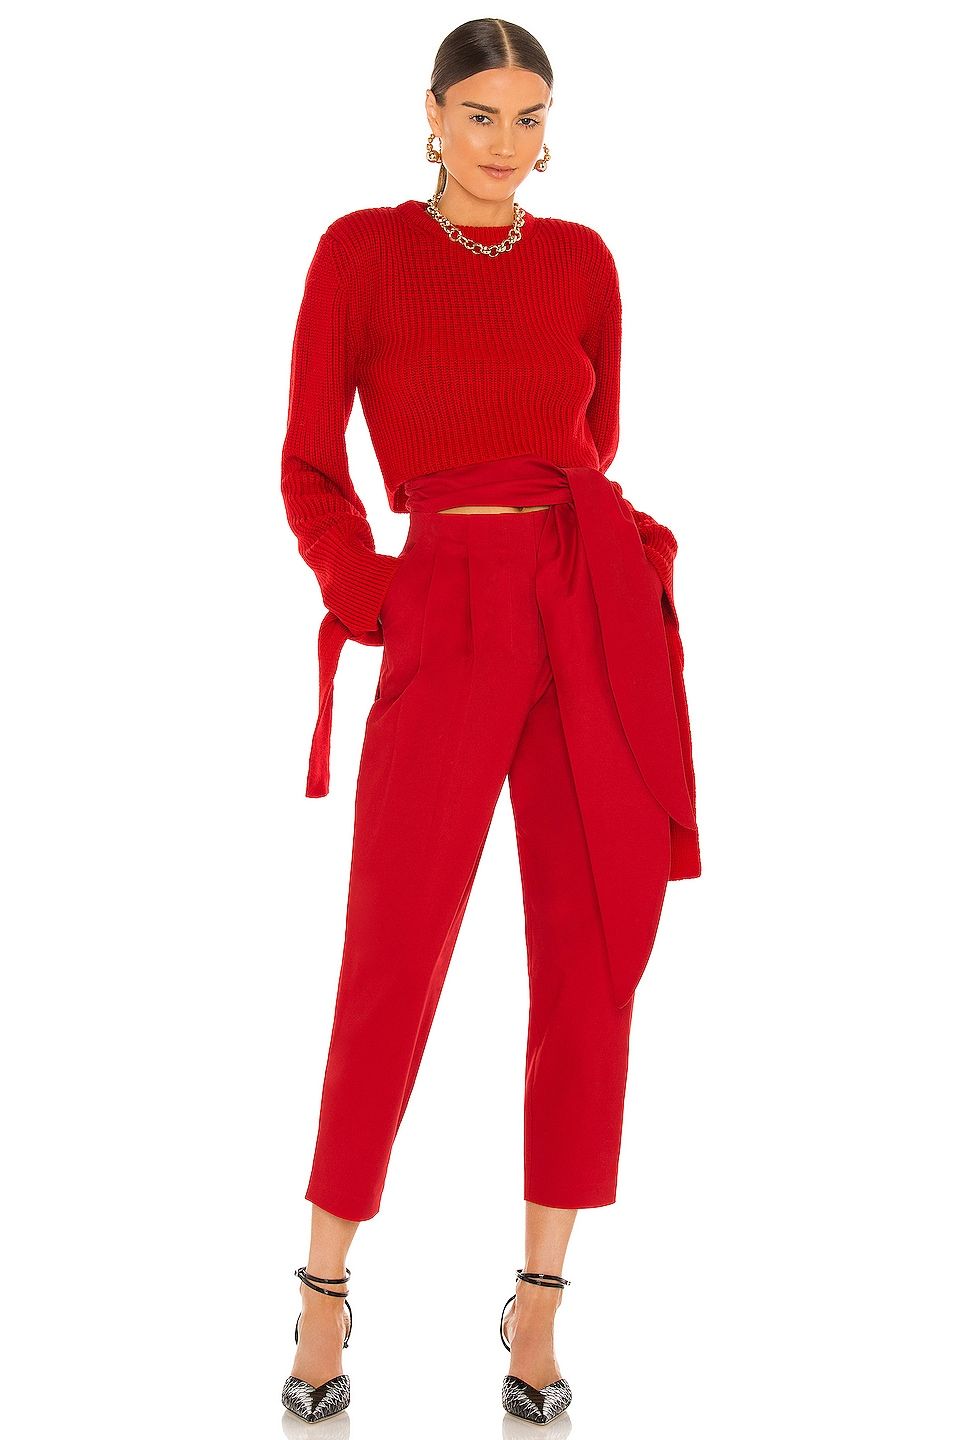 7 Chic Ways to Wear Red Pants in 2022